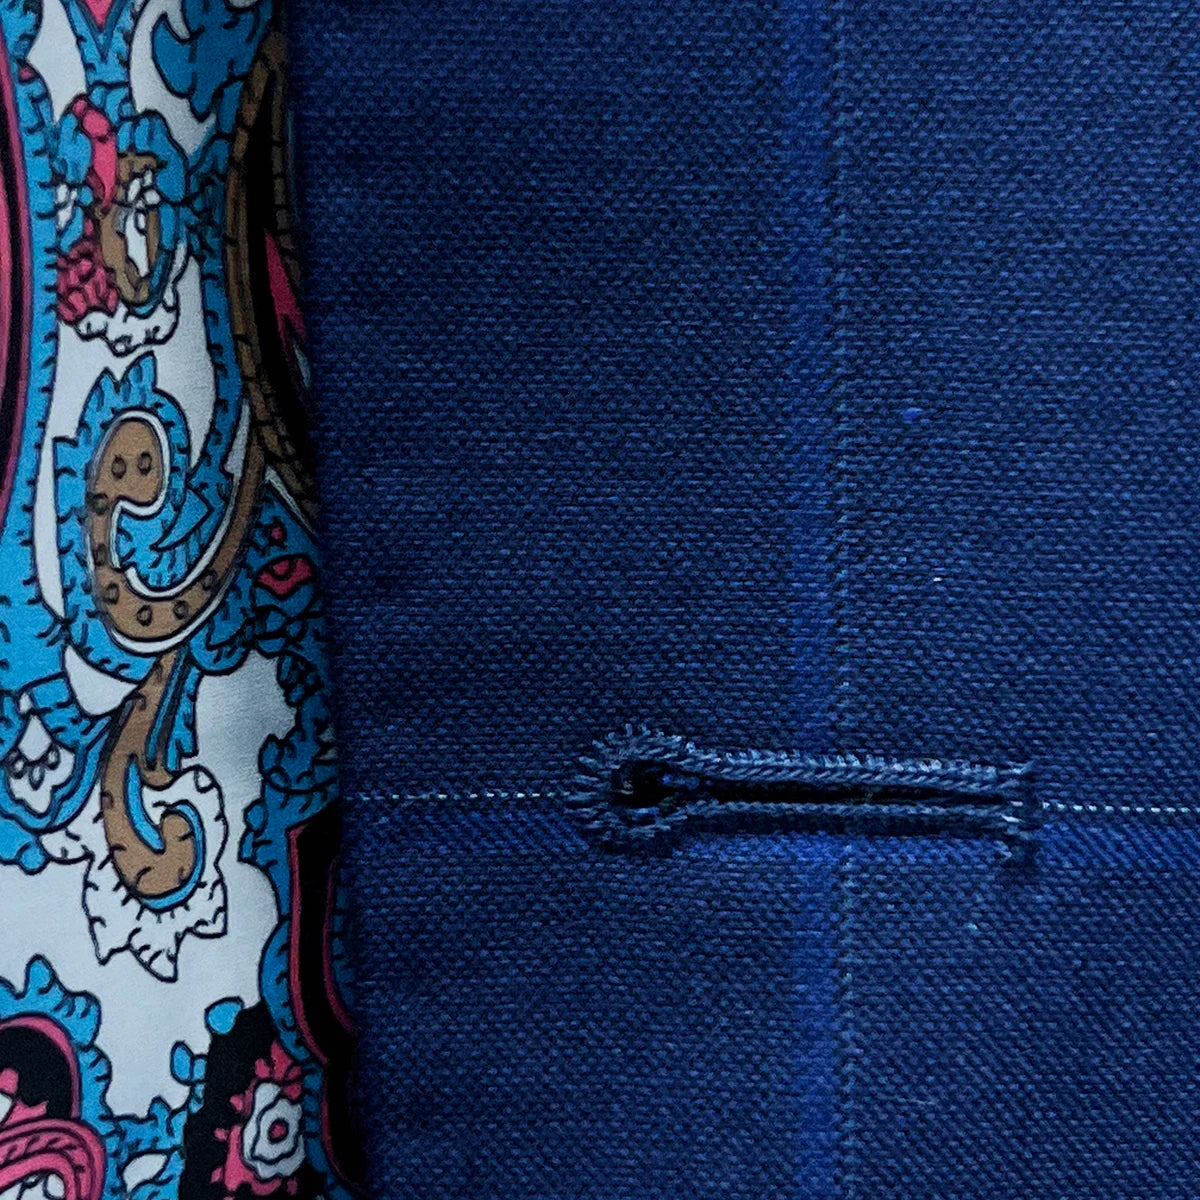 Detailed image of the hand pick stitching on the buttonholes, showcasing the white contrast thread on the royal blue fabric.